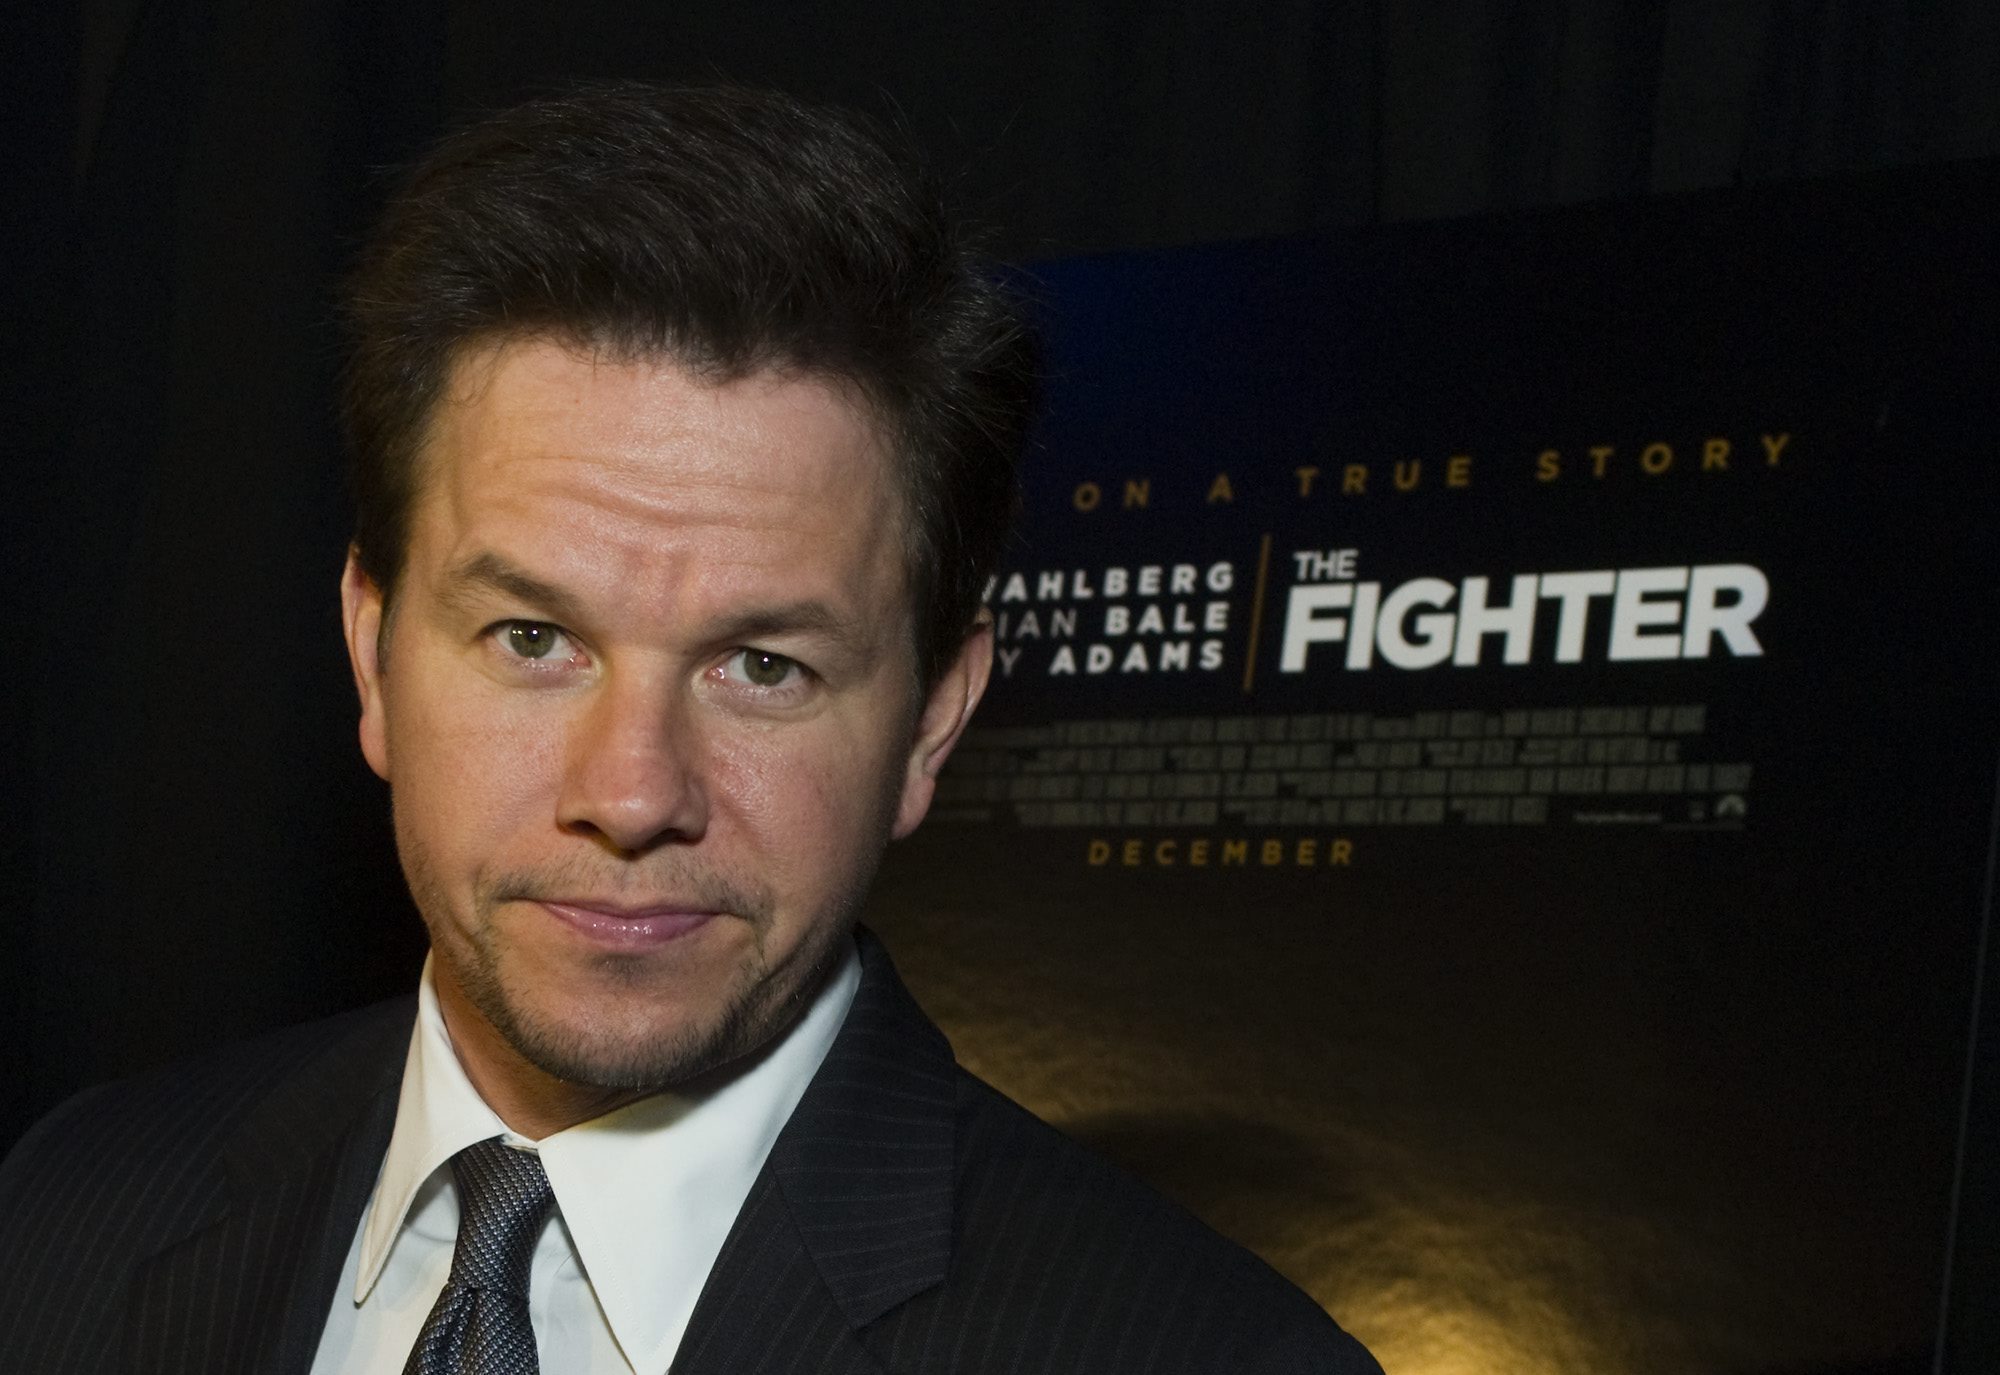 Mickey Ward, Mark Wahlberg, The Fighter, Christian Bale